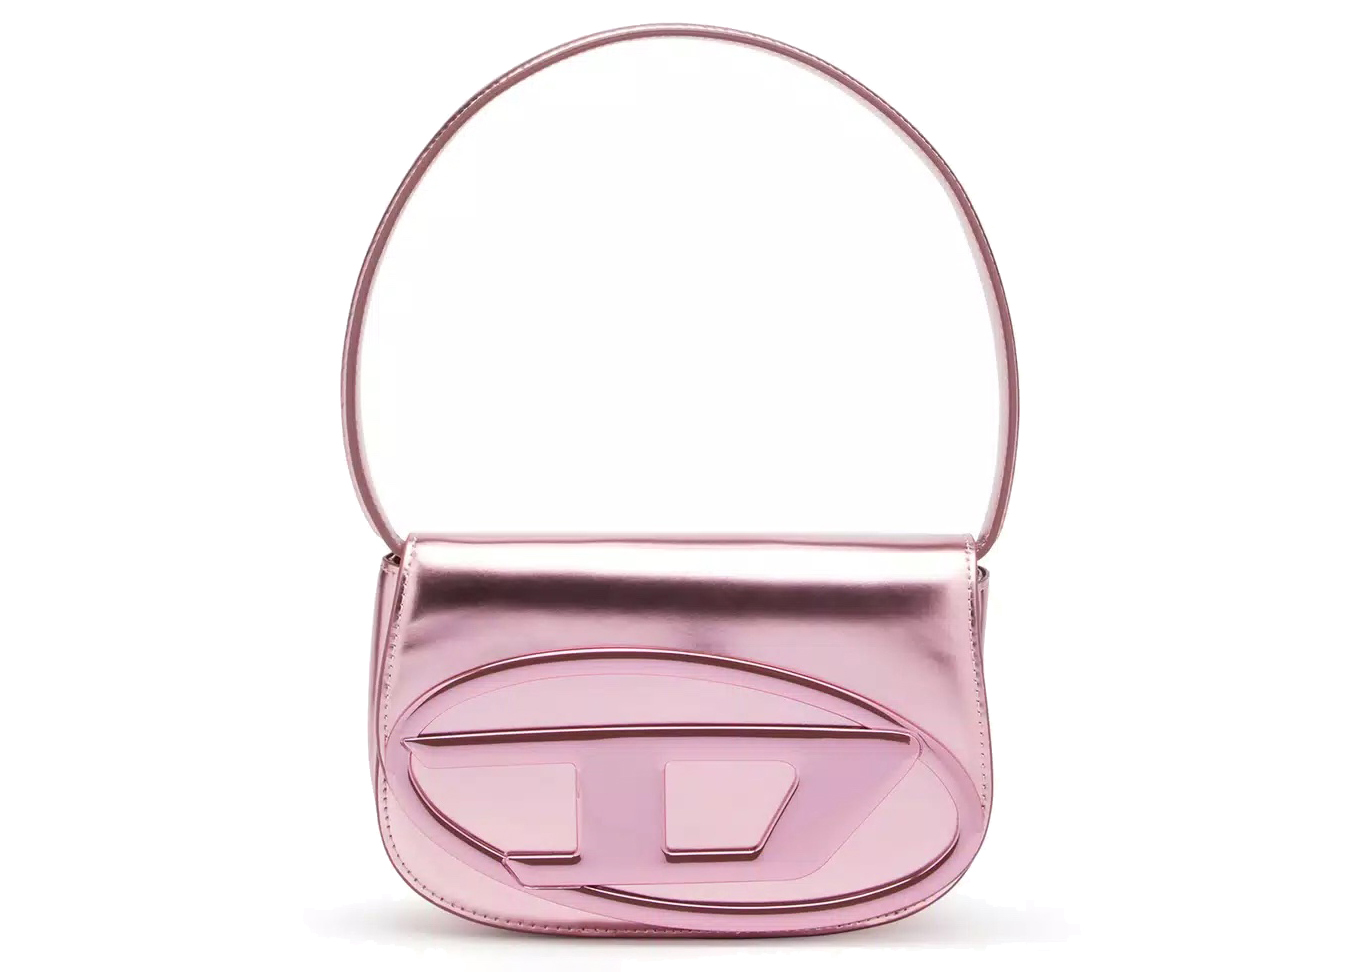 Diesel 1DR Shoulder Bag Mirrored Leather Pink in Mirrored Leather ...